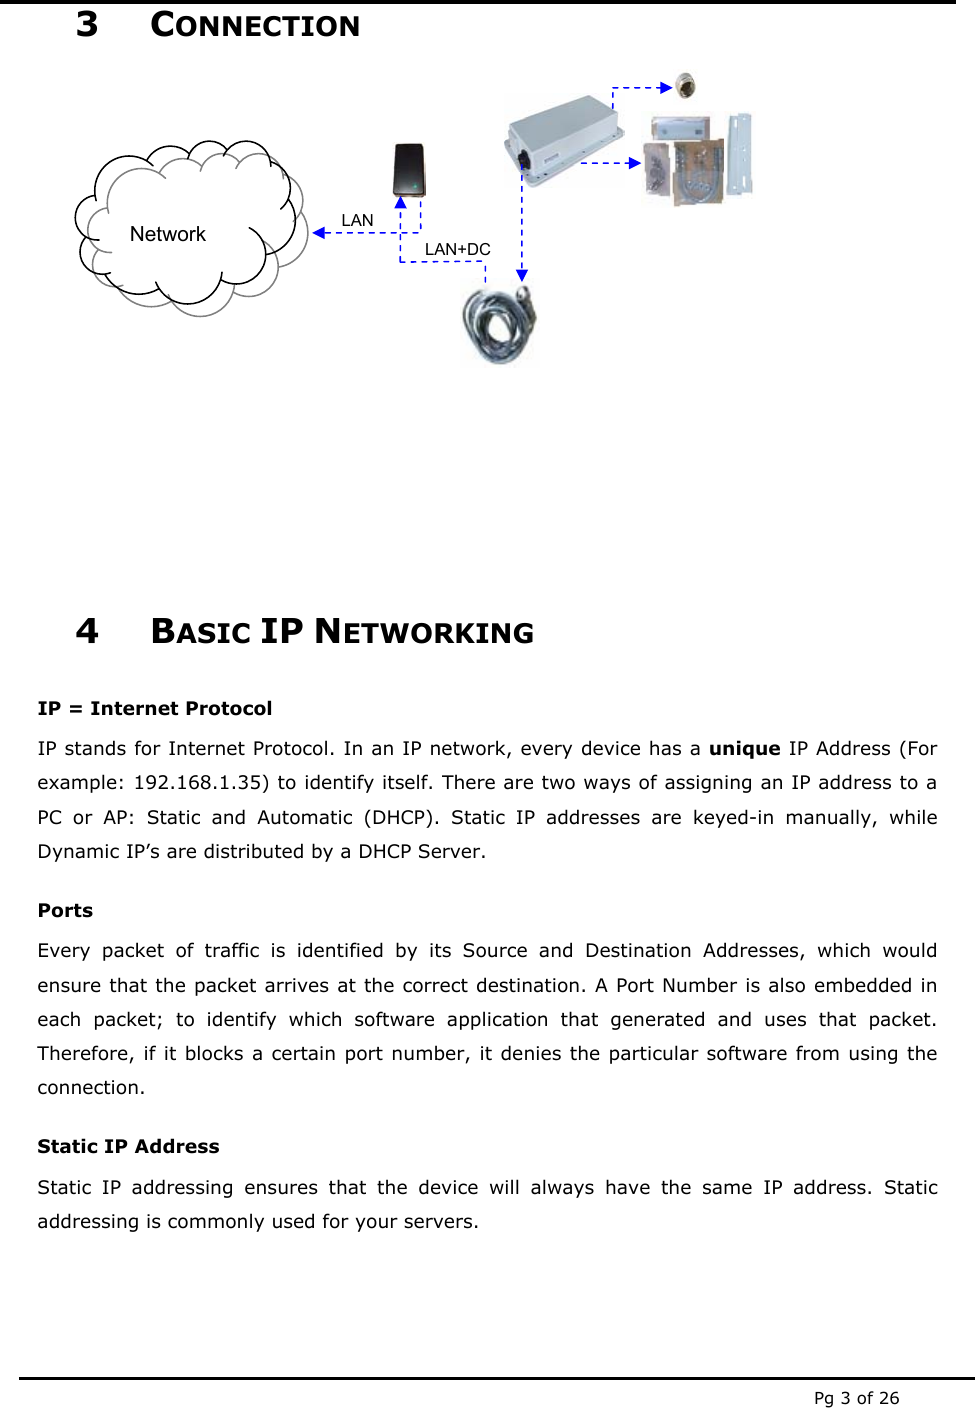  Pg 3 of 26 3 CONNECTION                4 BASIC IP NETWORKING IP = Internet Protocol IP stands for Internet Protocol. In an IP network, every device has a unique IP Address (For example: 192.168.1.35) to identify itself. There are two ways of assigning an IP address to a PC or AP: Static and Automatic (DHCP). Static IP addresses are keyed-in manually, while Dynamic IP’s are distributed by a DHCP Server. Ports Every packet of traffic is identified by its Source and Destination Addresses, which would ensure that the packet arrives at the correct destination. A Port Number is also embedded in each packet; to identify which software application that generated and uses that packet. Therefore, if it blocks a certain port number, it denies the particular software from using the connection. Static IP Address Static IP addressing ensures that the device will always have the same IP address. Static addressing is commonly used for your servers. Network  LAN+DCLAN 